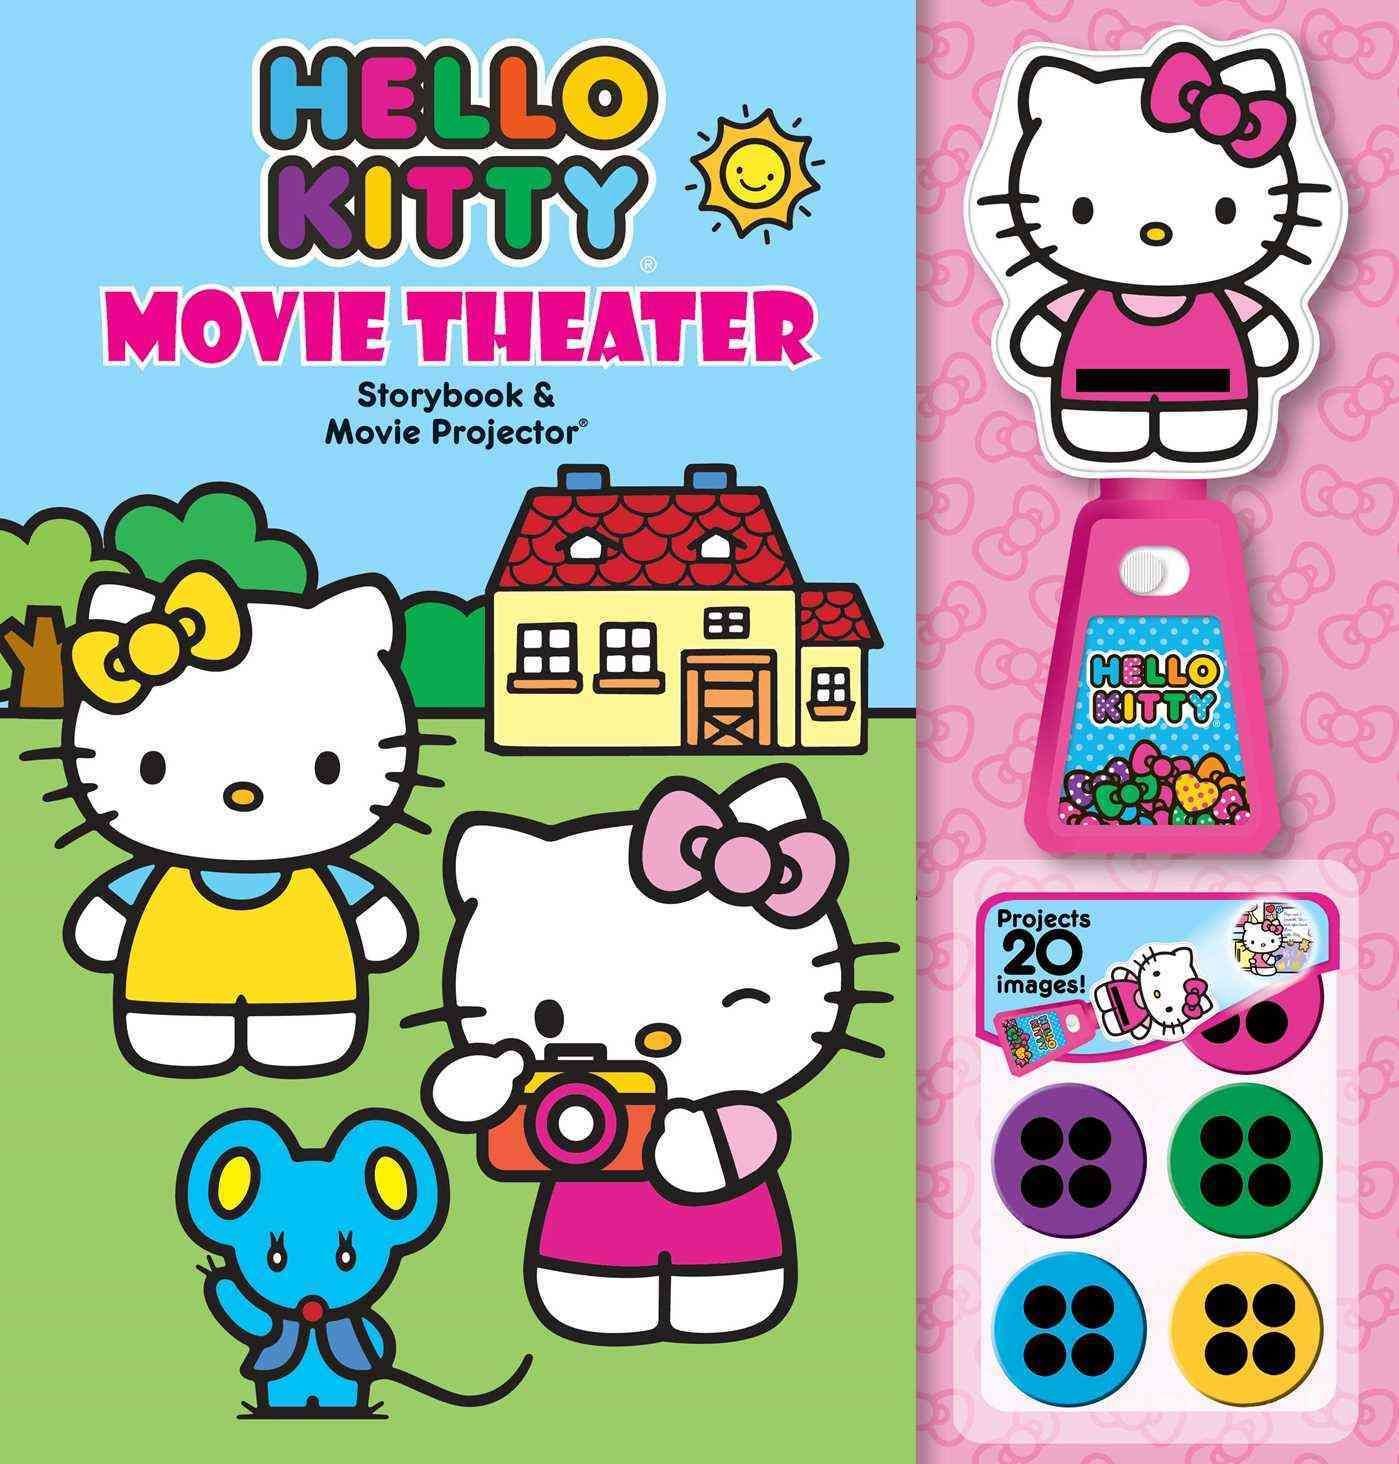 Hello kitty's halloween costume party story book: Hello Kitty and her  friends as they embark on a Halloween adventure filled with friendly  ghosts